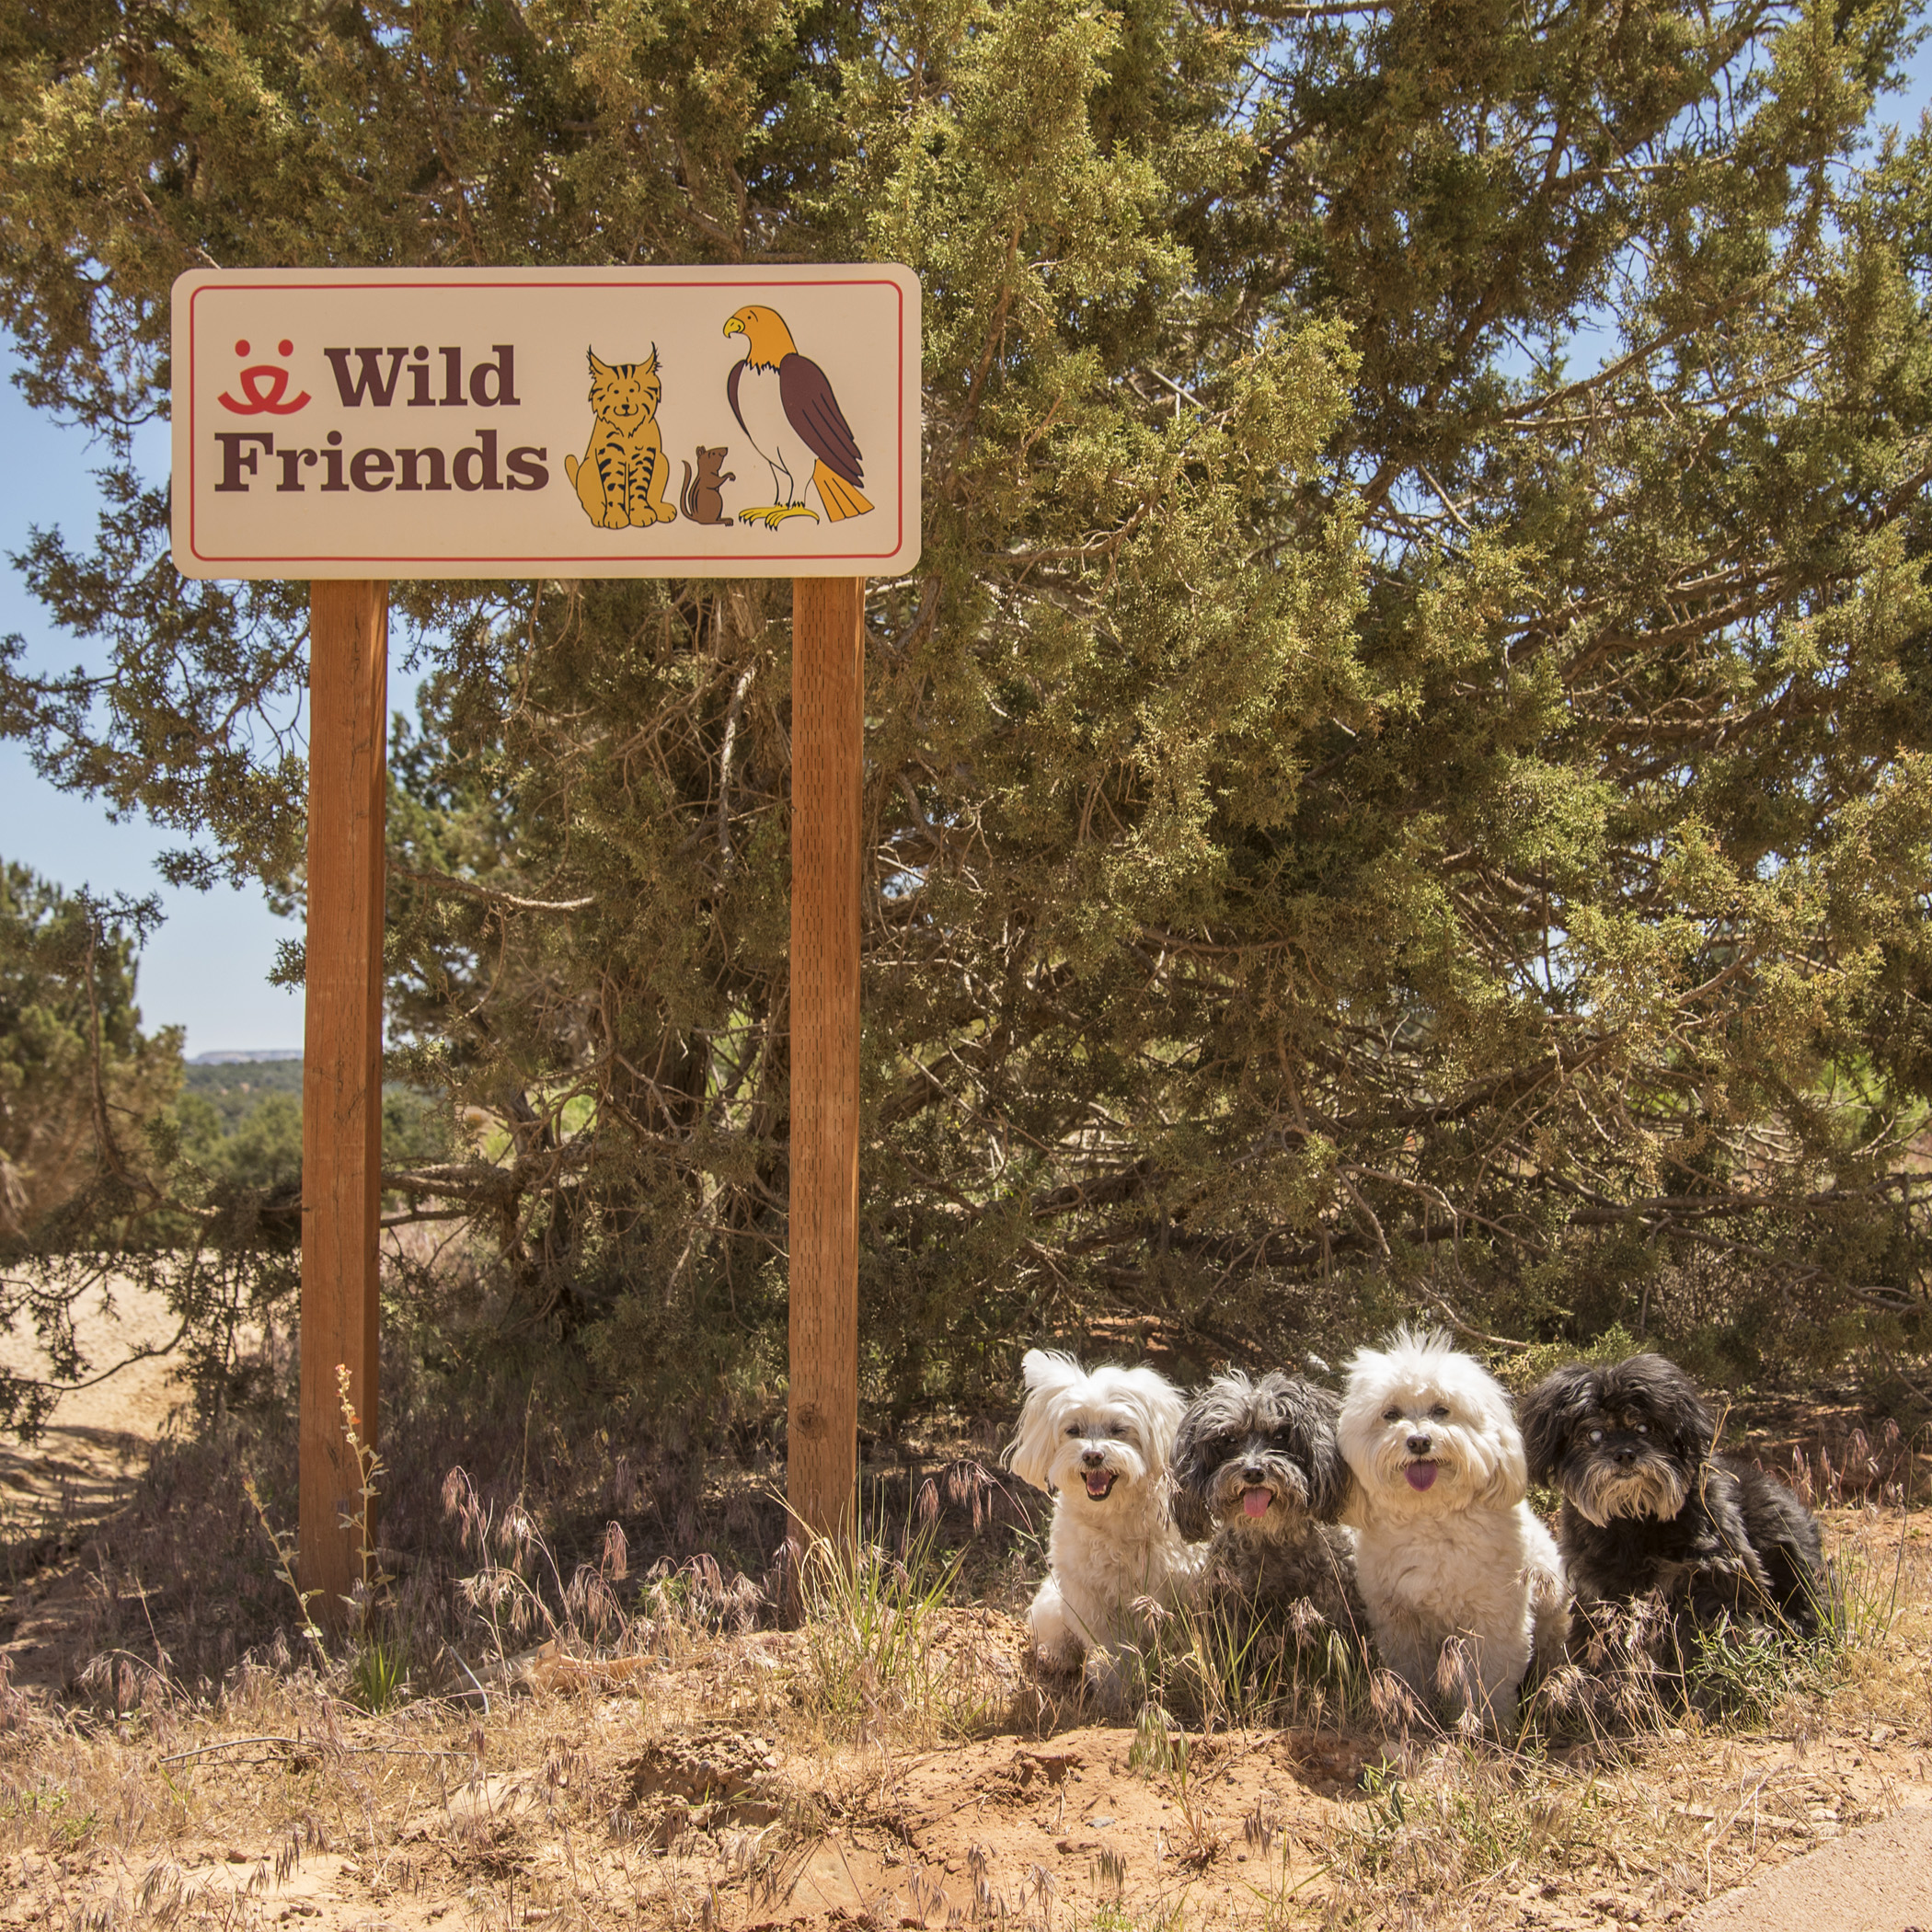  Mommy &amp; Daddy started their volunteering at Wild Friends. Wild Friends refuge is a state- and federally-licensed wildlife rehabilitation center for helping orphaned and injured wild animals get back on their feet – and back to the wild. A small 